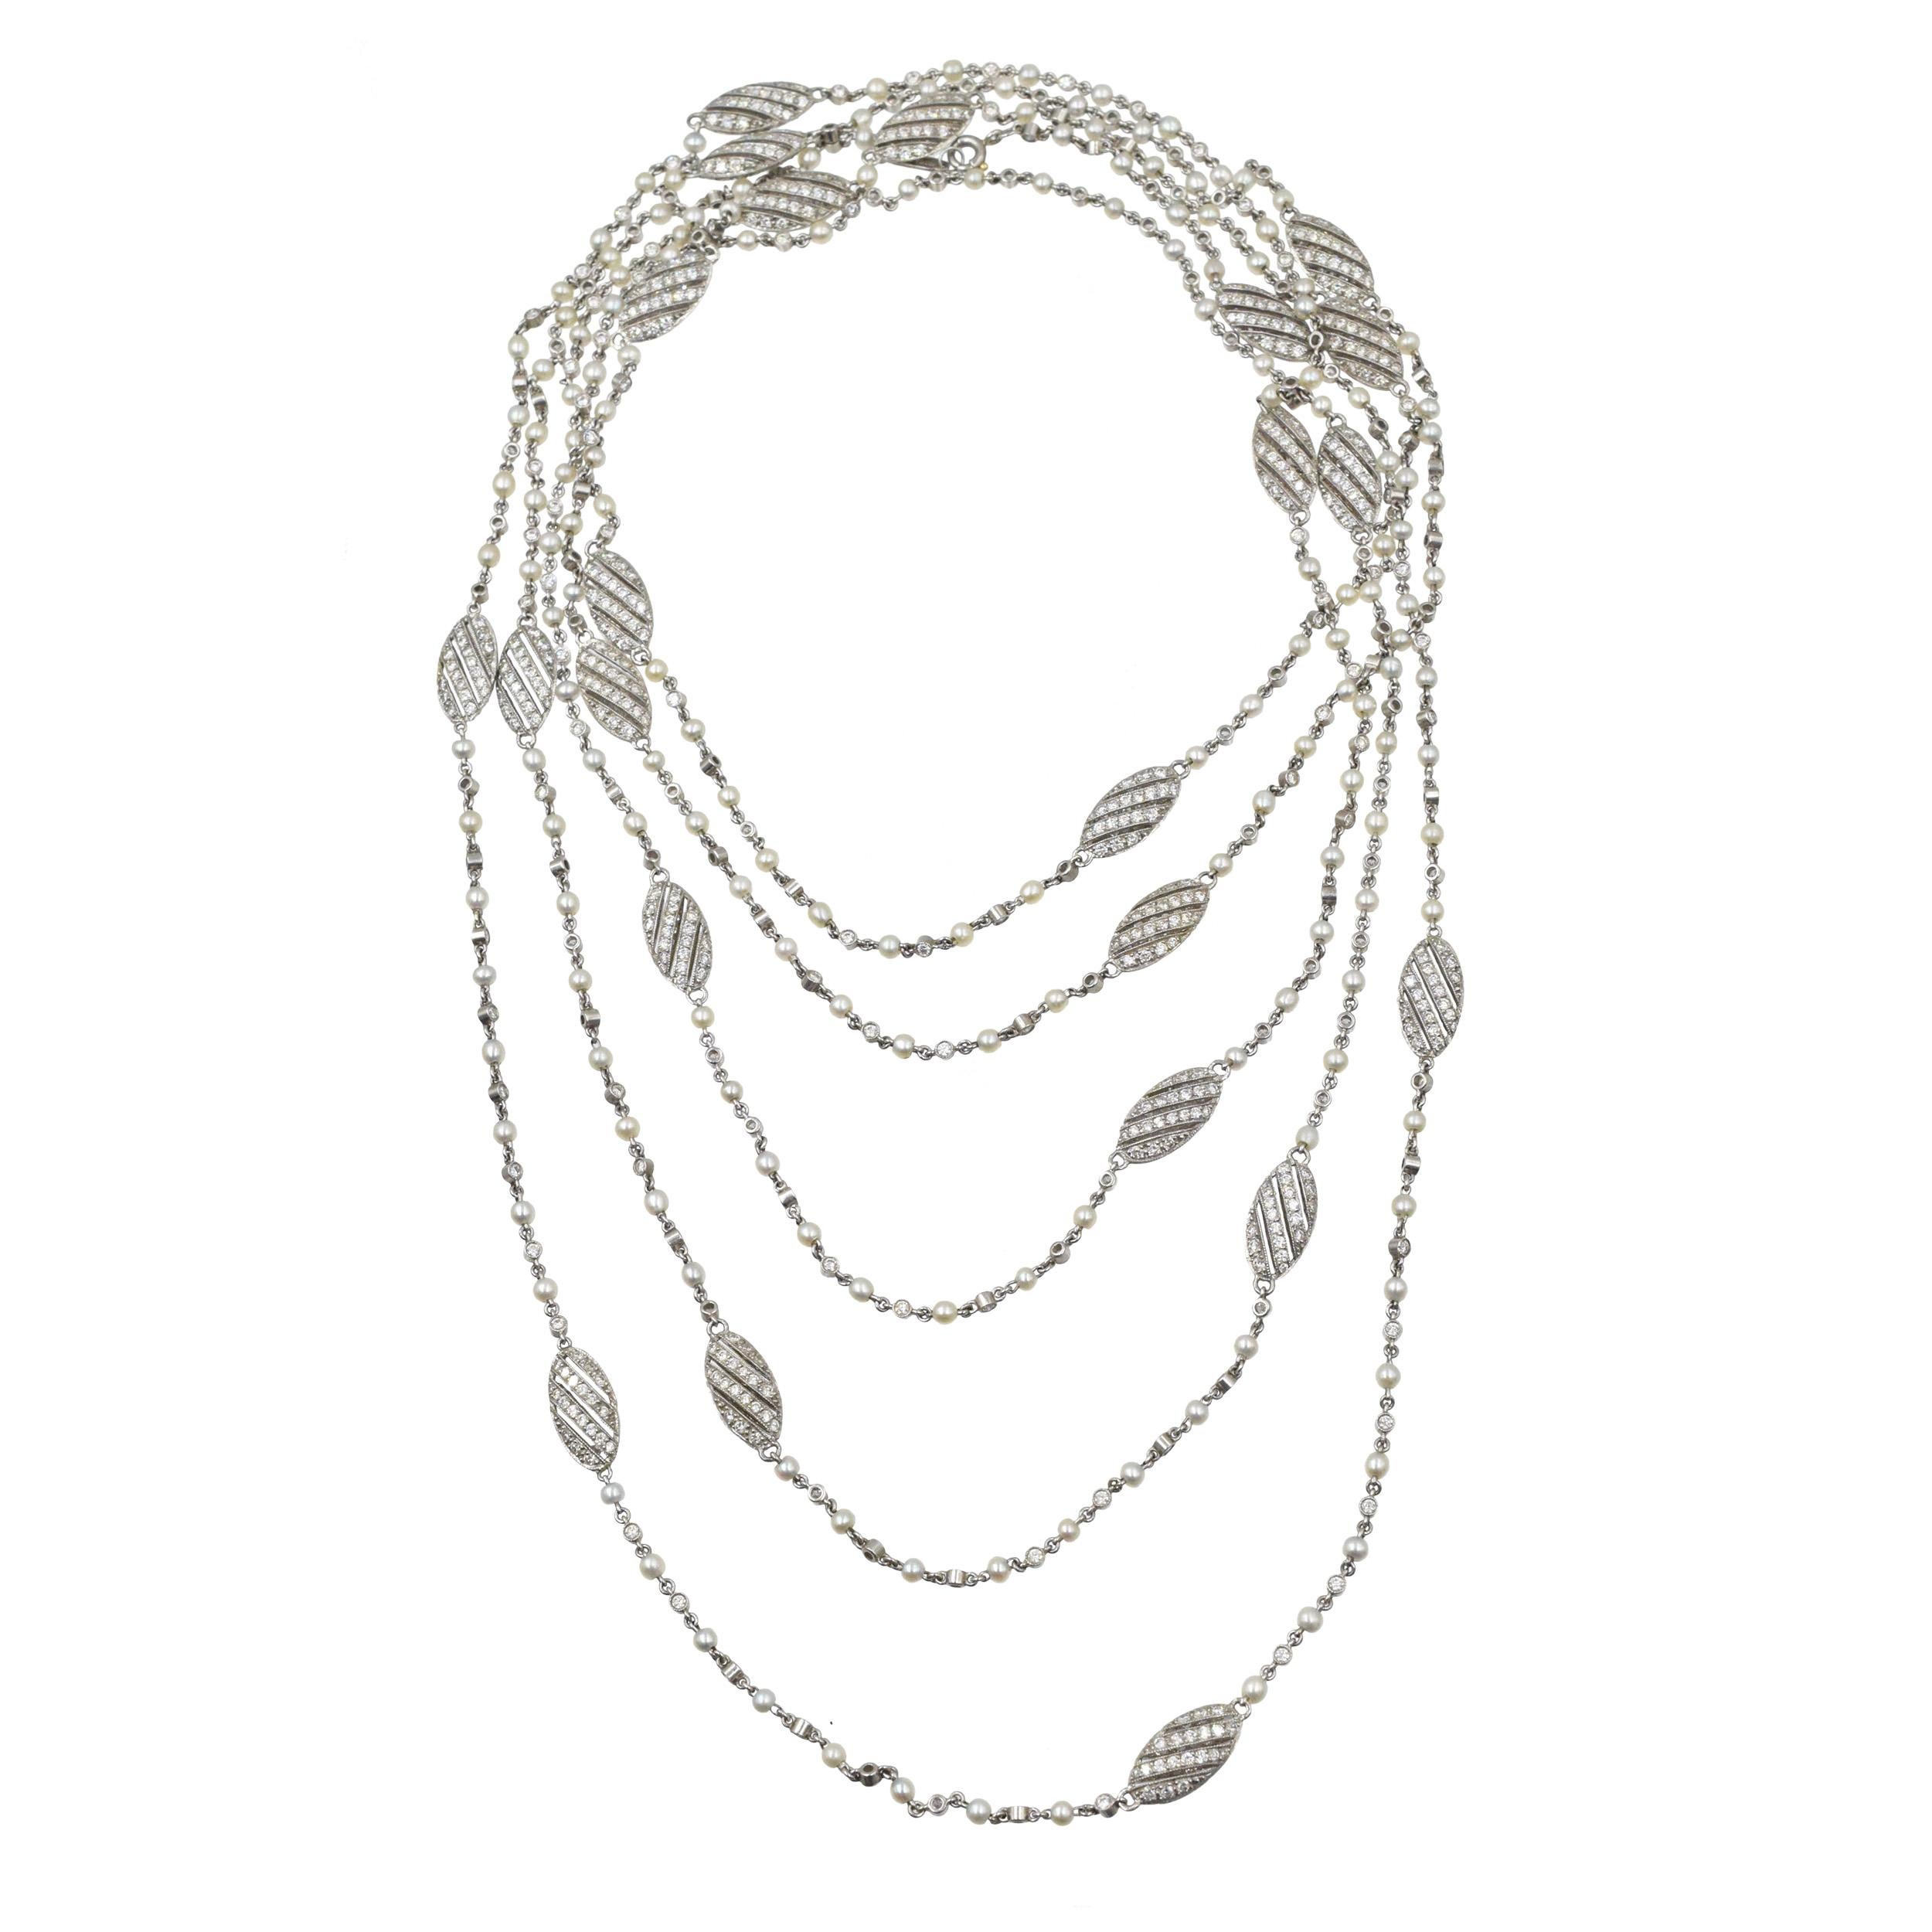 Tiffany & Co. Diamond And Seed Pearl Long Chain In Platinum. 
This necklace consists of 184 seed pearls alternating with 184 round brilliant cut diamonds bezel set in platinum, accented with 23 equally spaced diamond encrusted dividers. There is